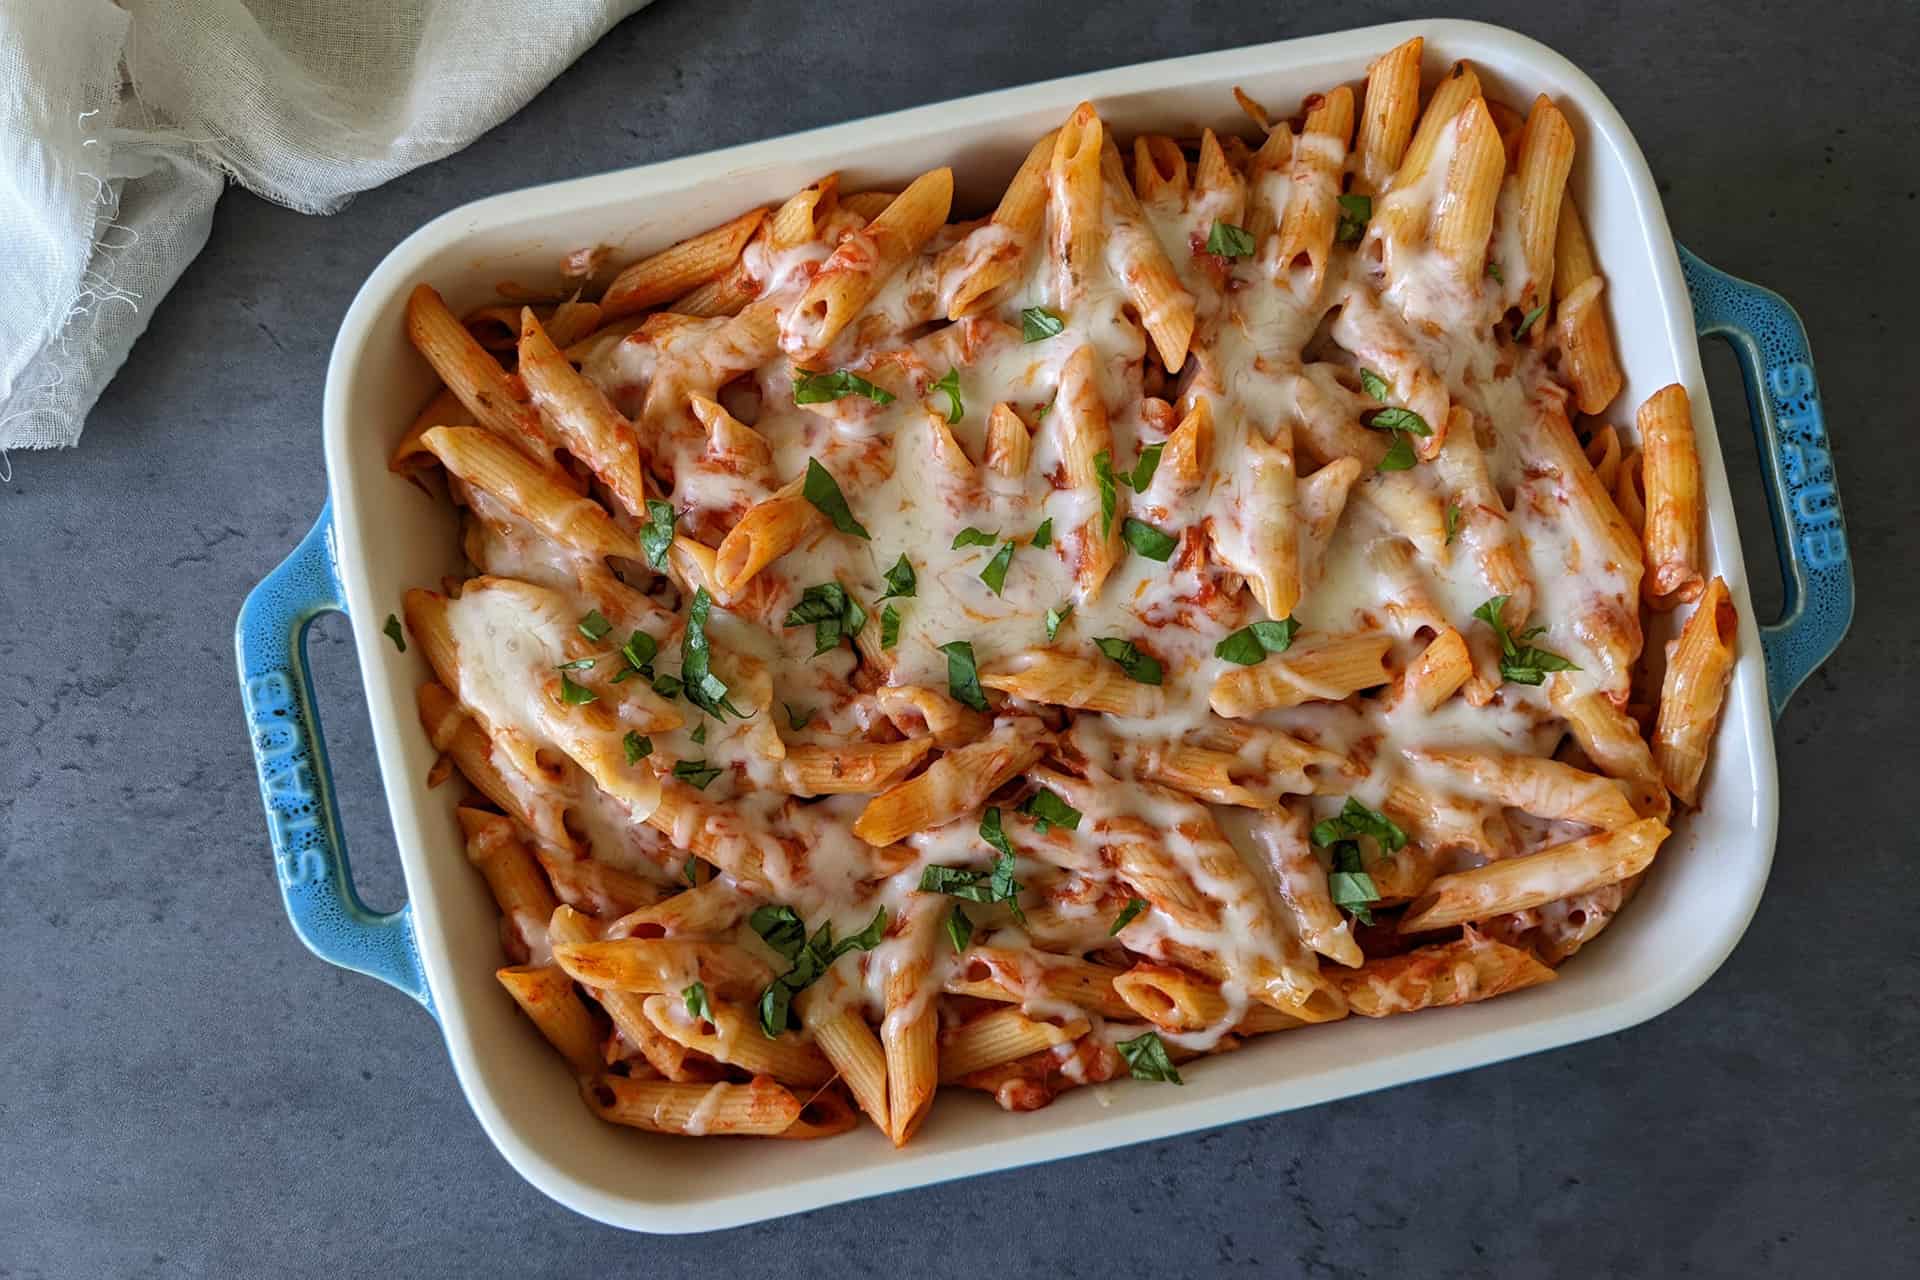 A casserole dish of easy baked penne pasta